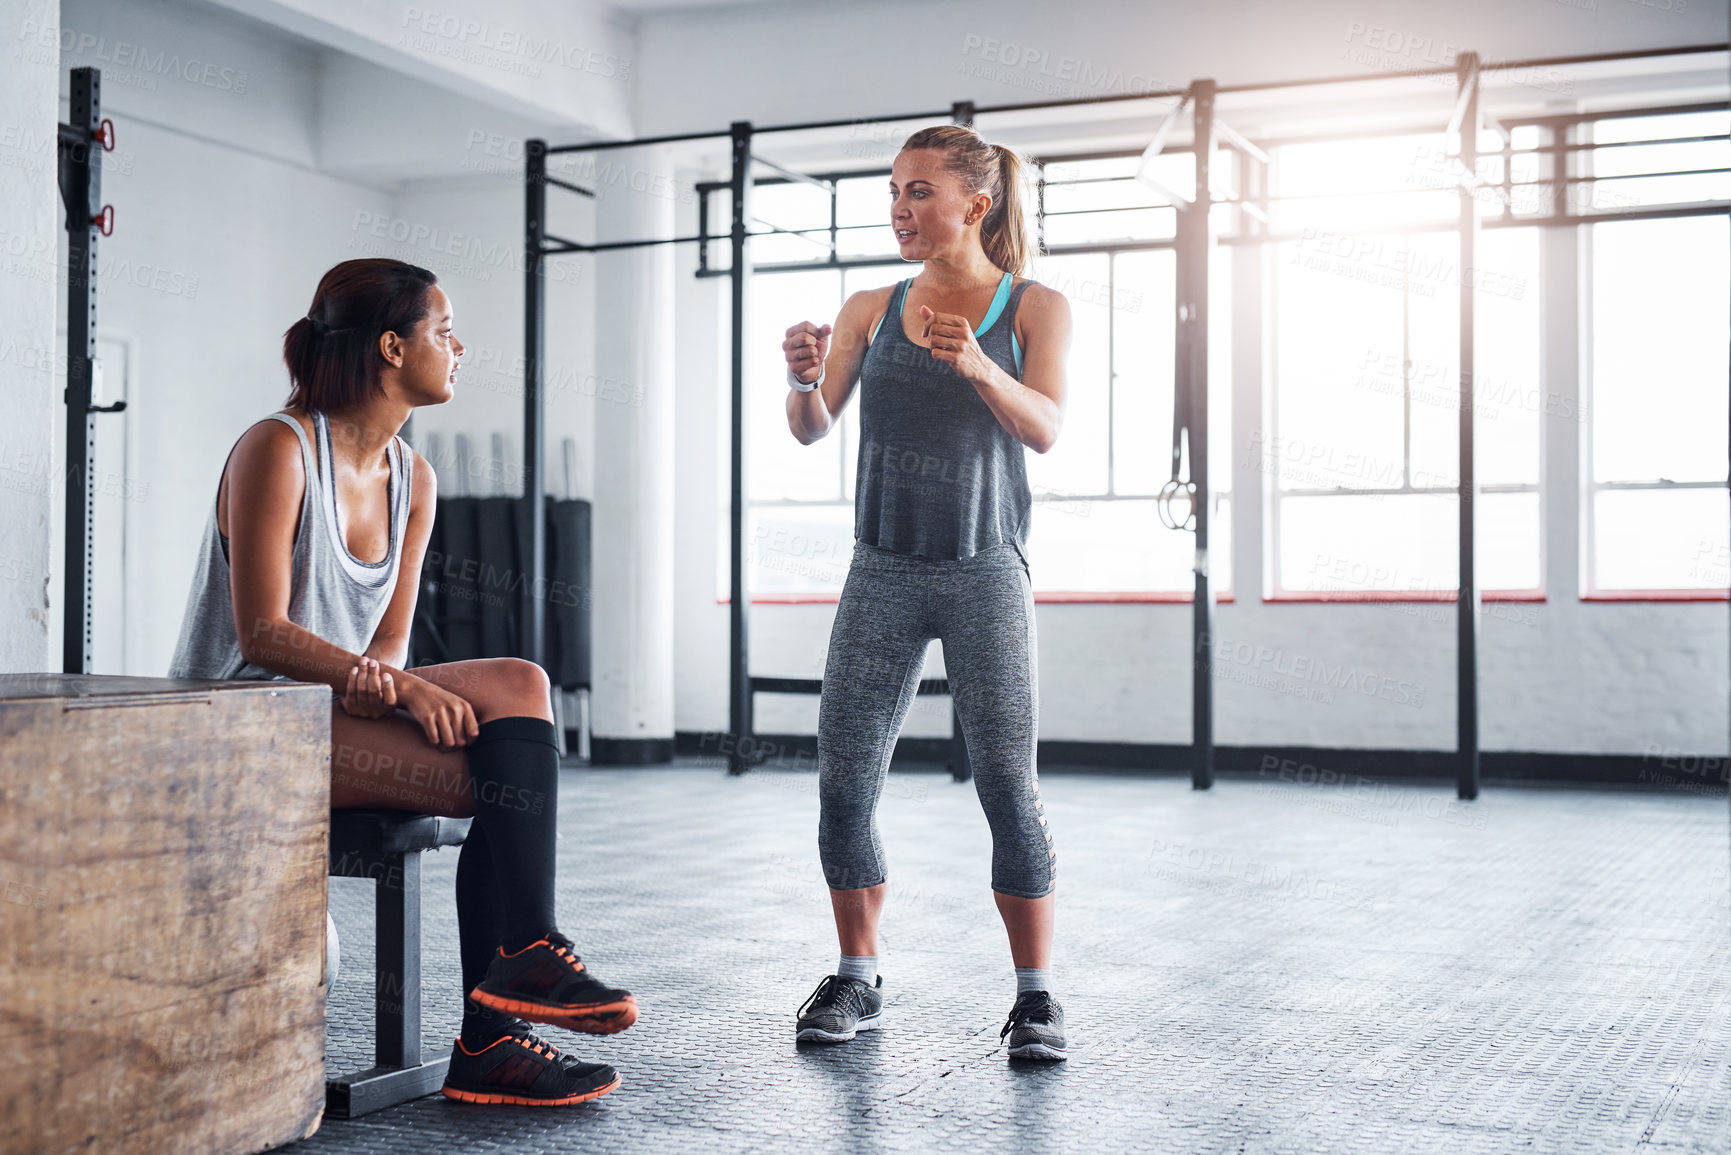 Buy stock photo Shot of a fitness instructor talking to her client in a gym